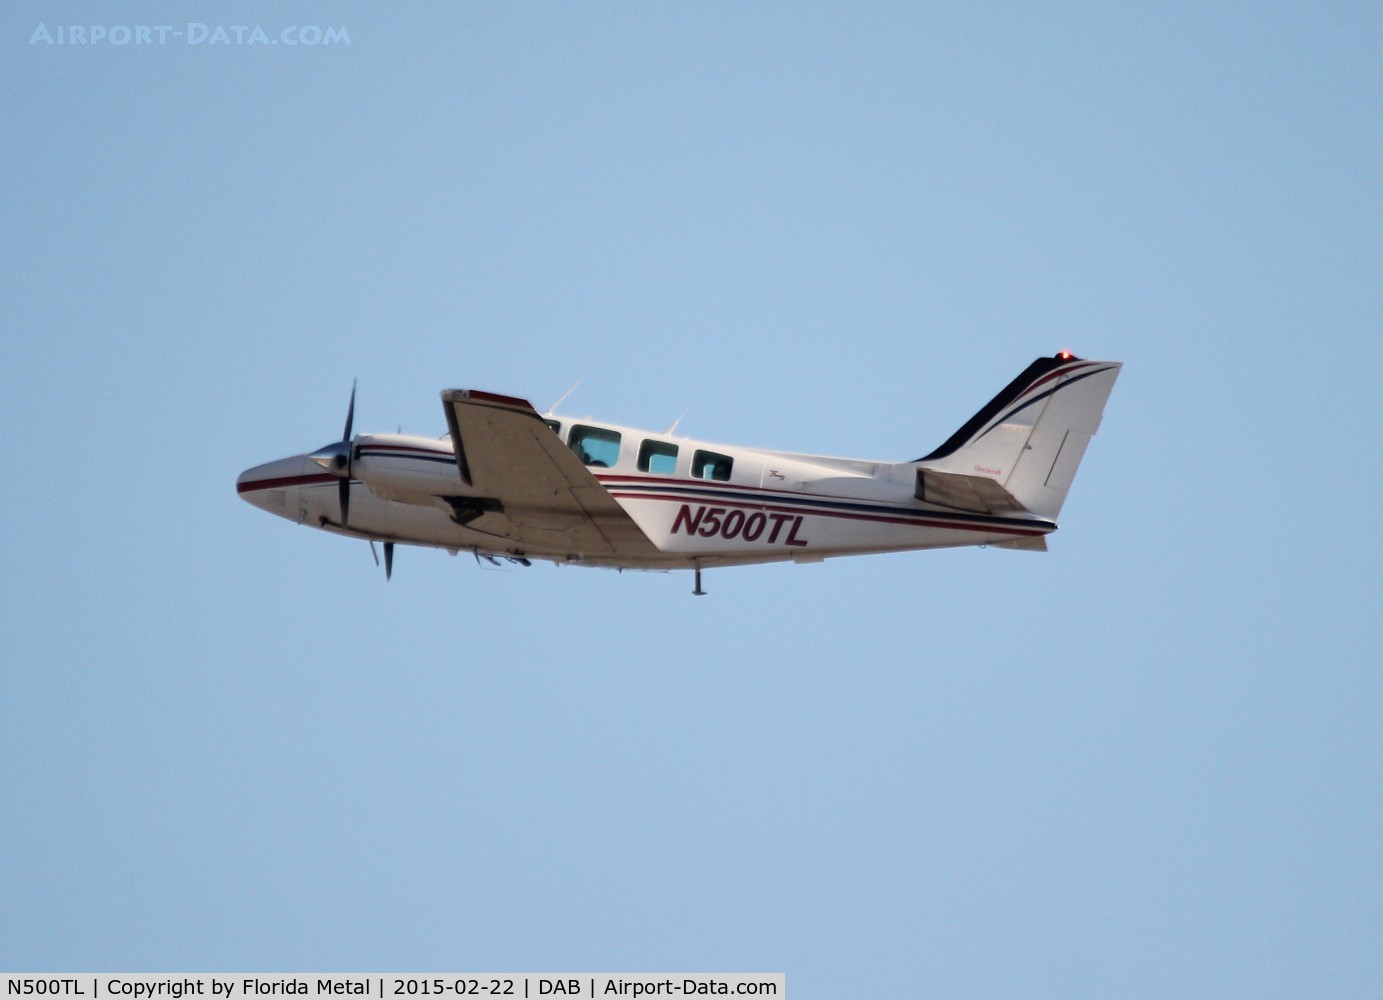 N500TL, Raytheon Aircraft Company 58 C/N TH-2103, Baron believed to be owned by former NASCAR Driver Terry Labonte, who is a pilot